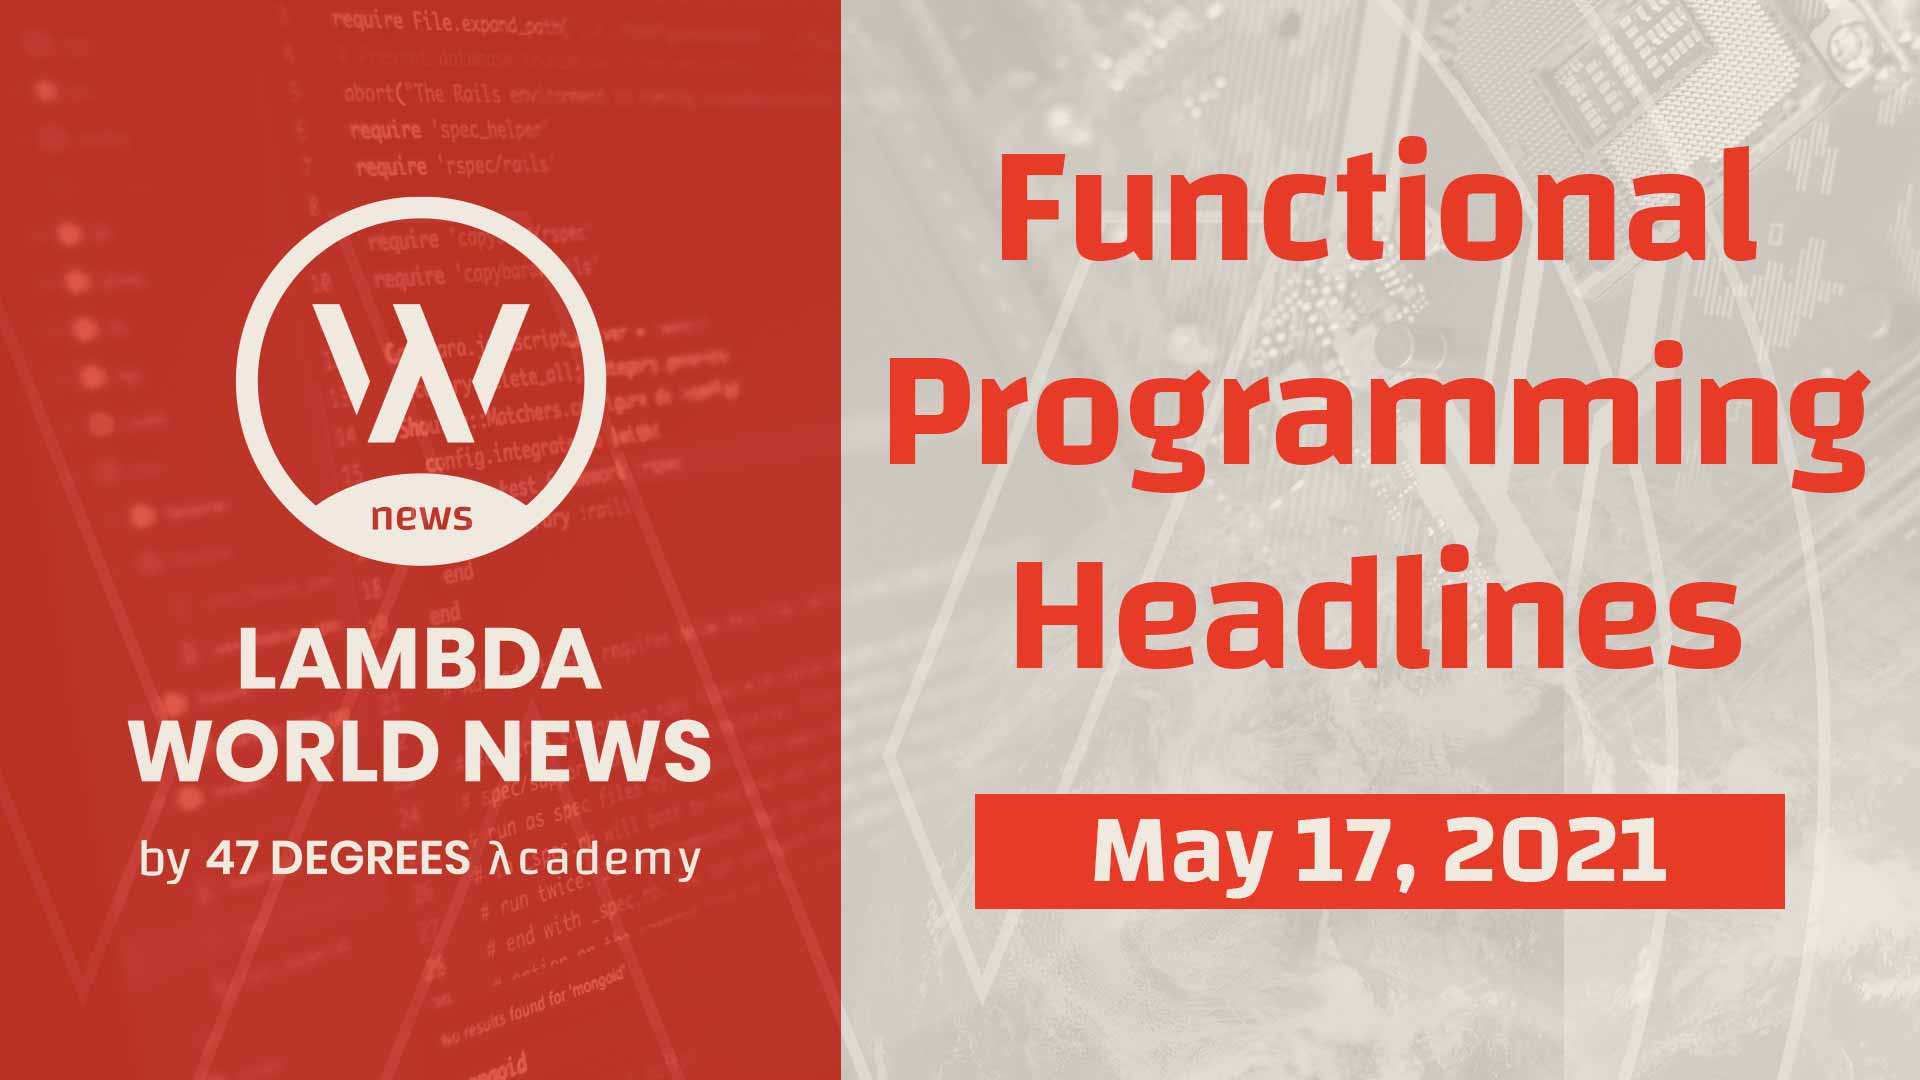 Lambda World News | Functional Programming Headlines for the week of May 17th, 2021